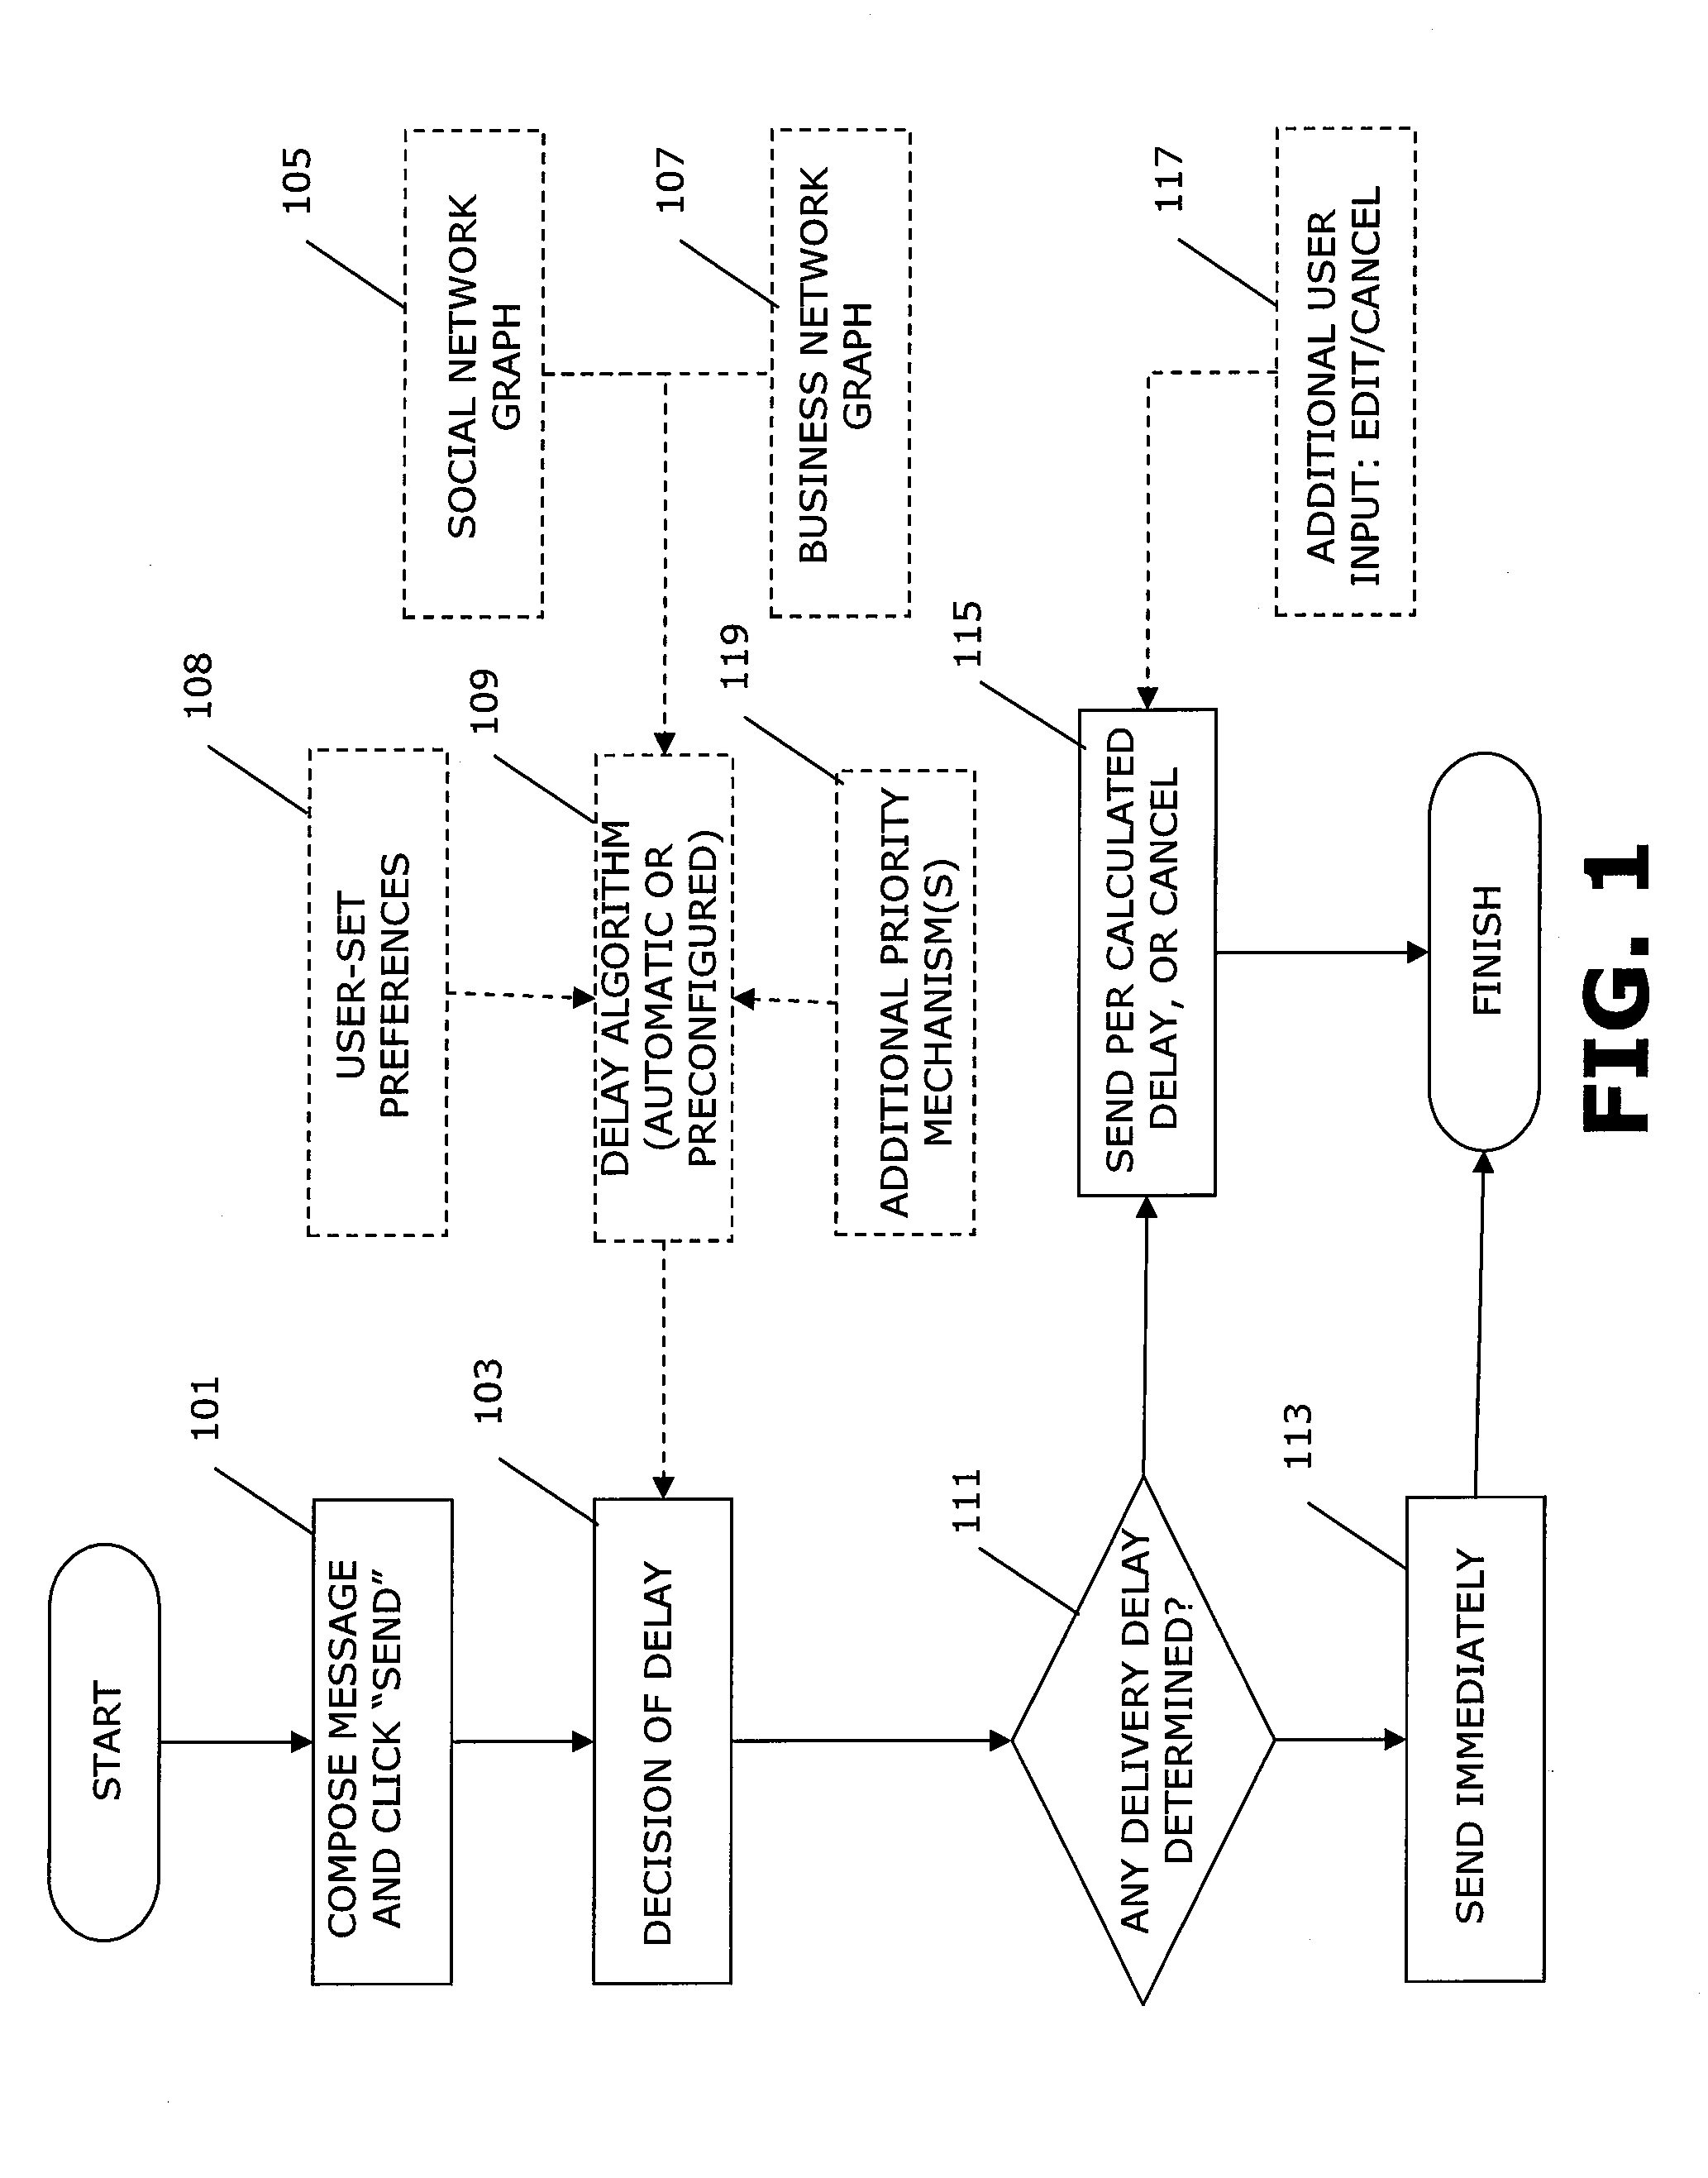 Establishing an automatic communications delay based on prevailing activity factors